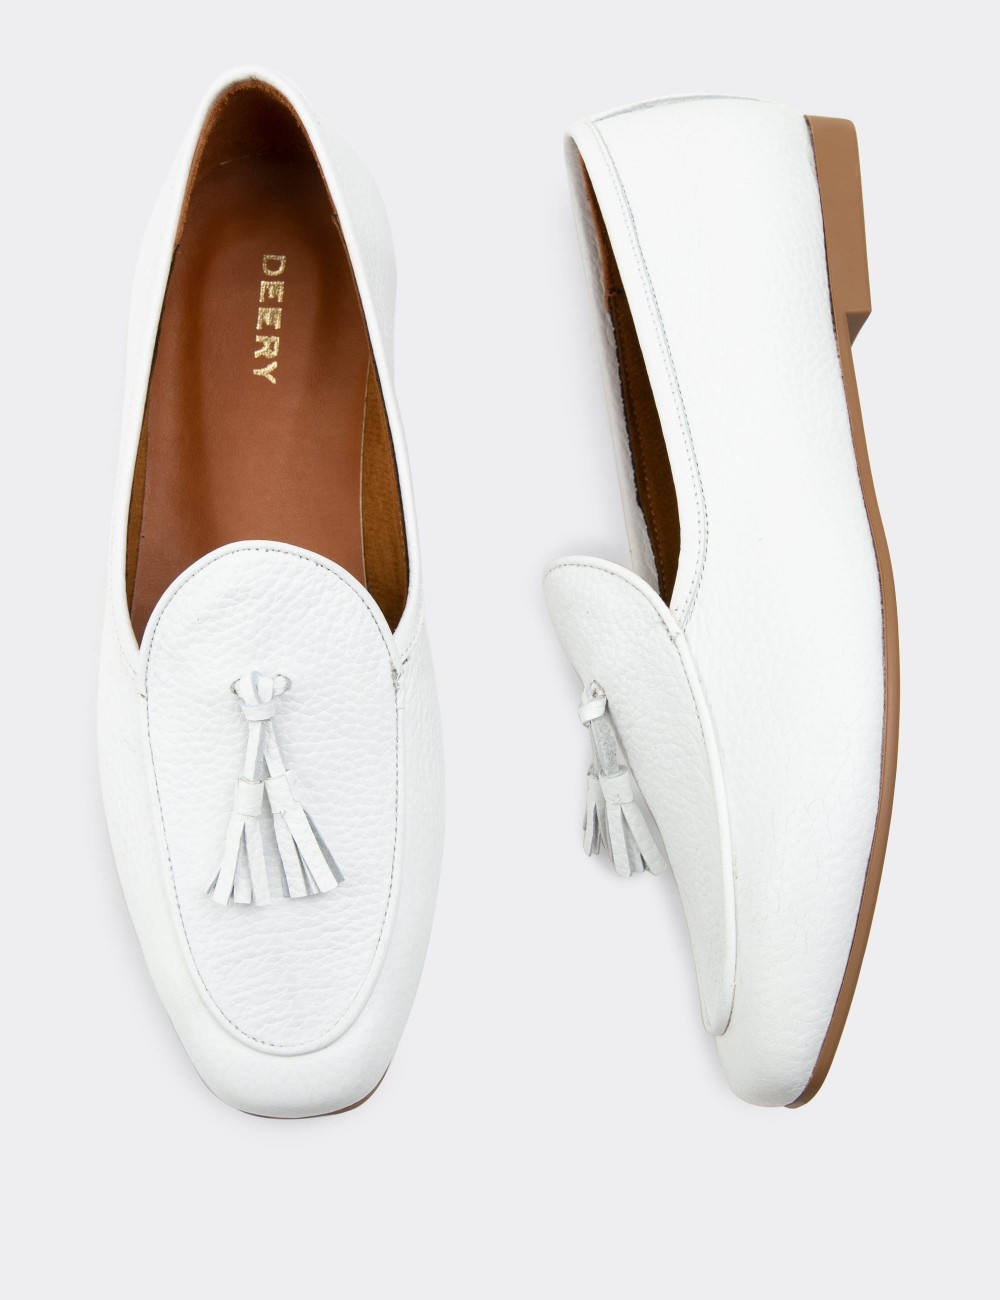 White  Leather Loafers - 01909ZBYZC01